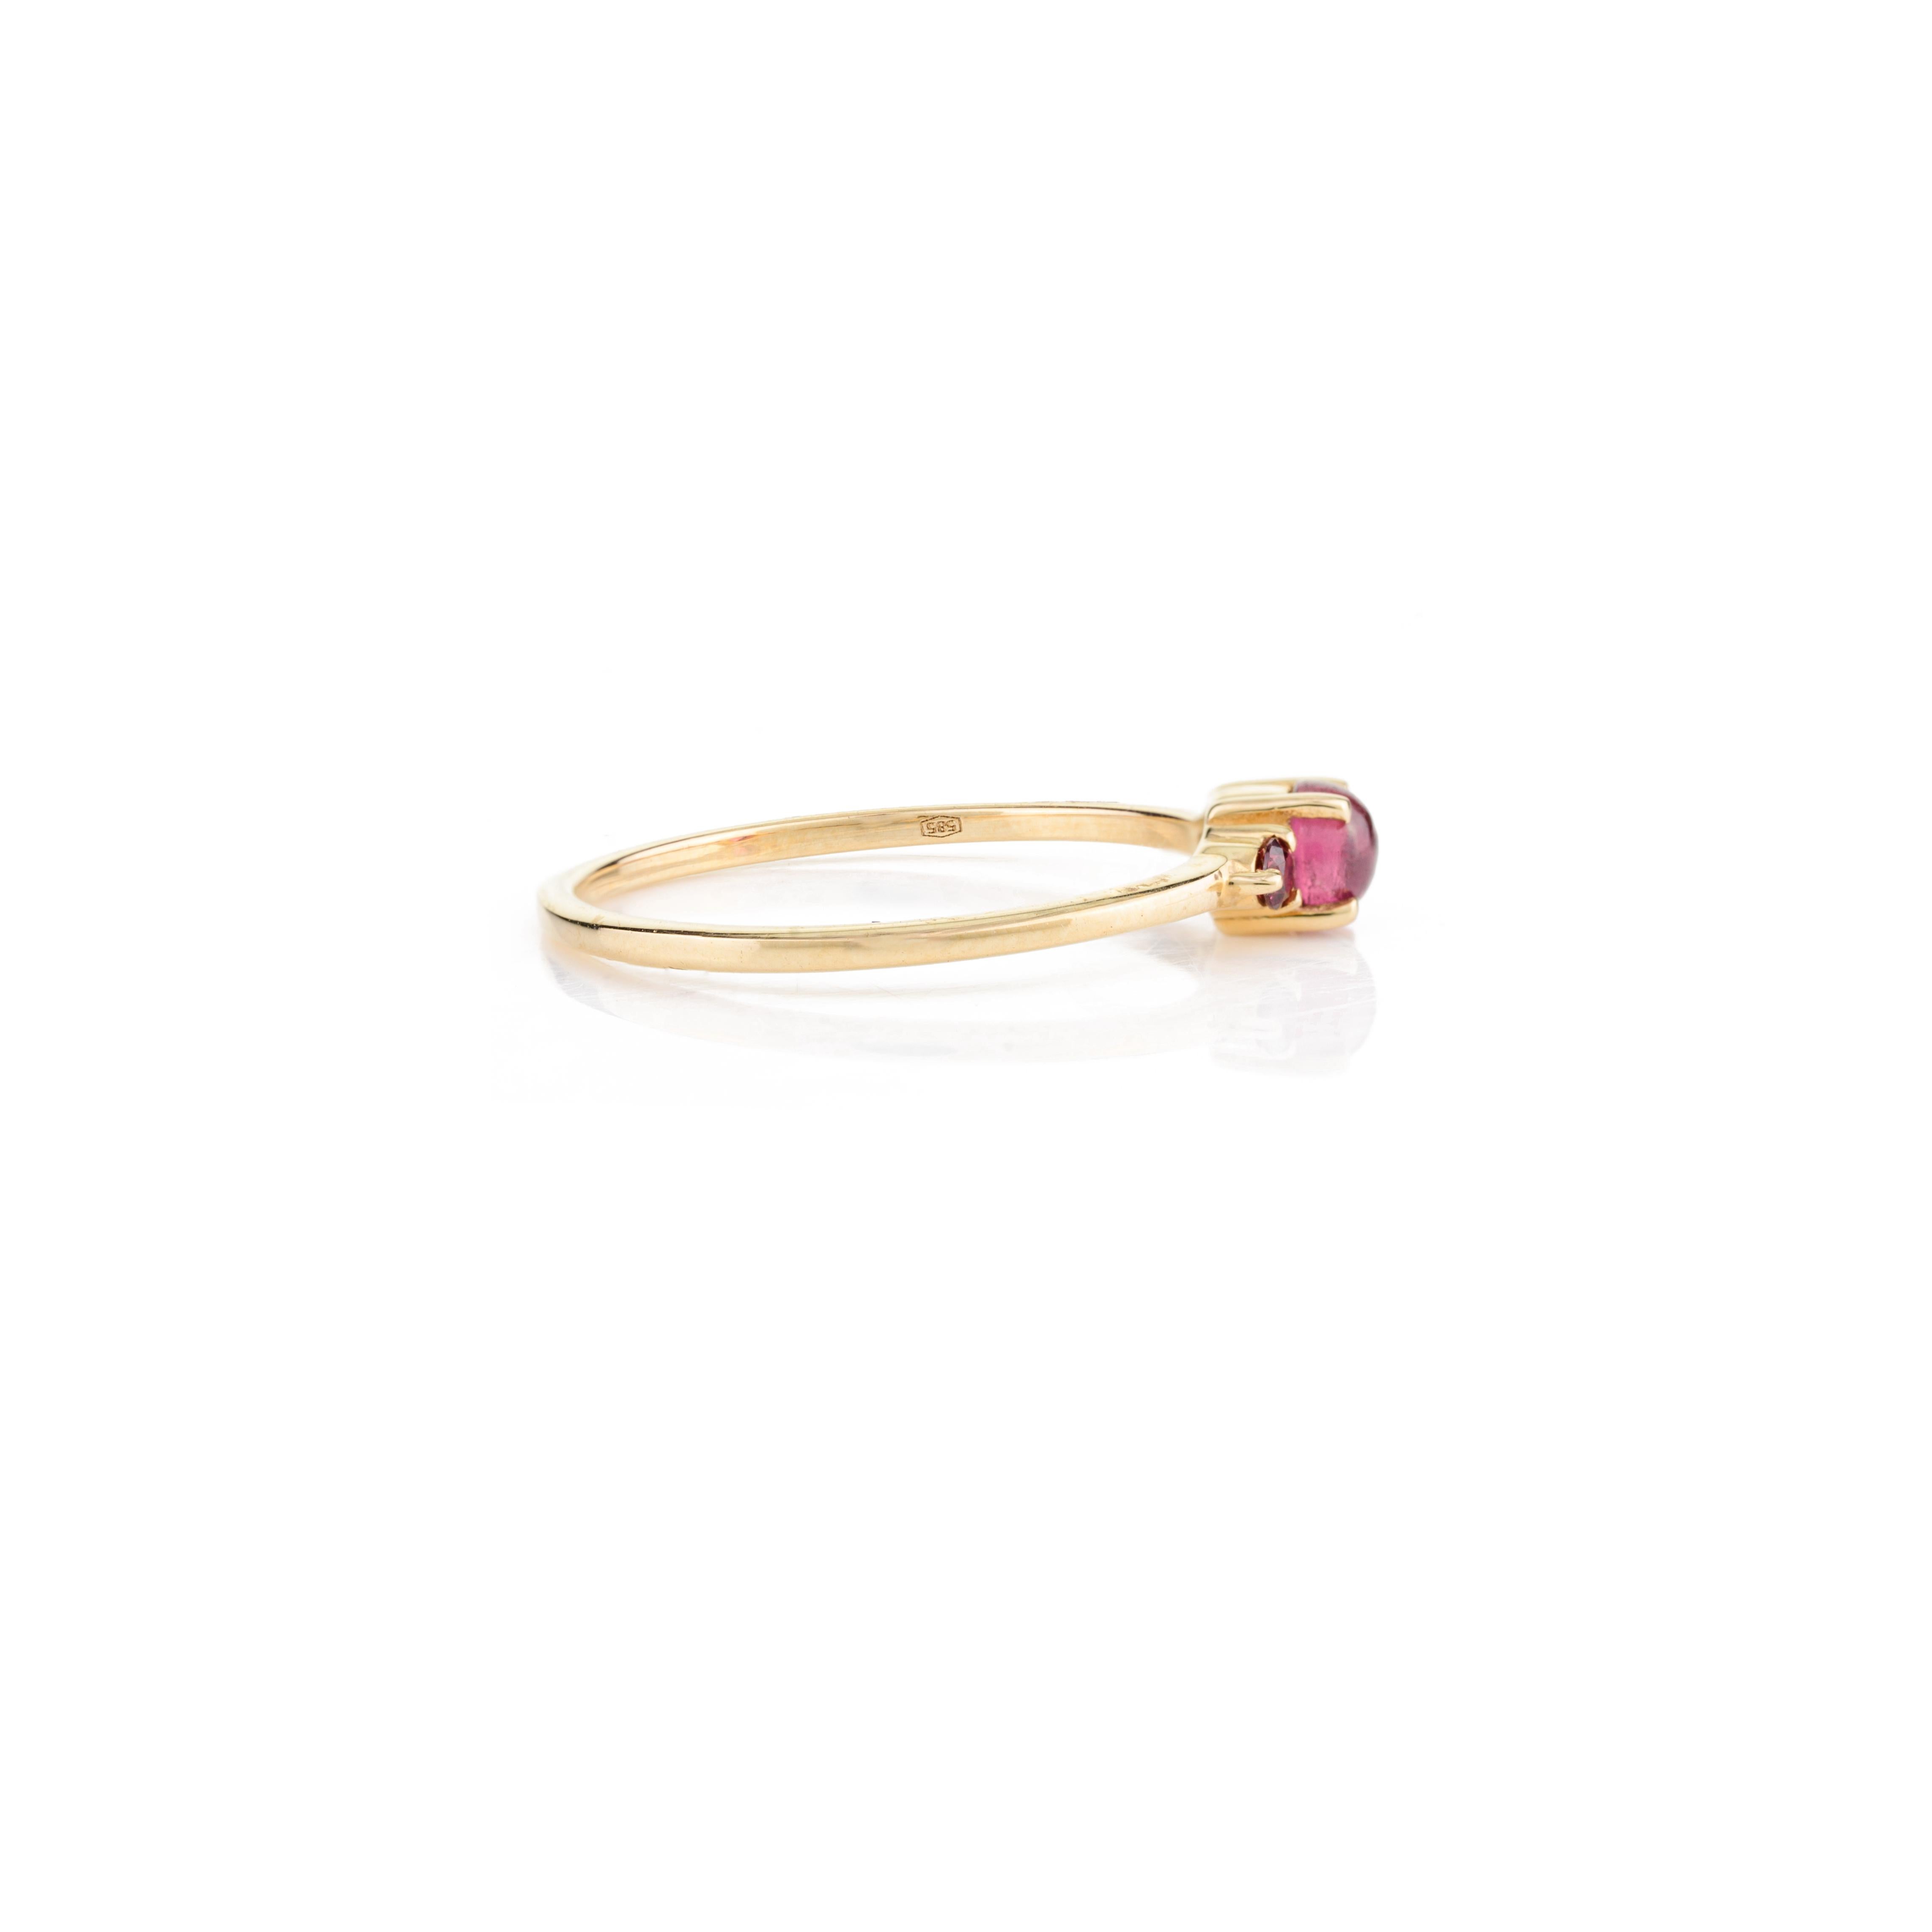 For Sale:  Dainty Three Stone Garnet Ring 14k Solid Yellow Gold Promise Ring for Her 3